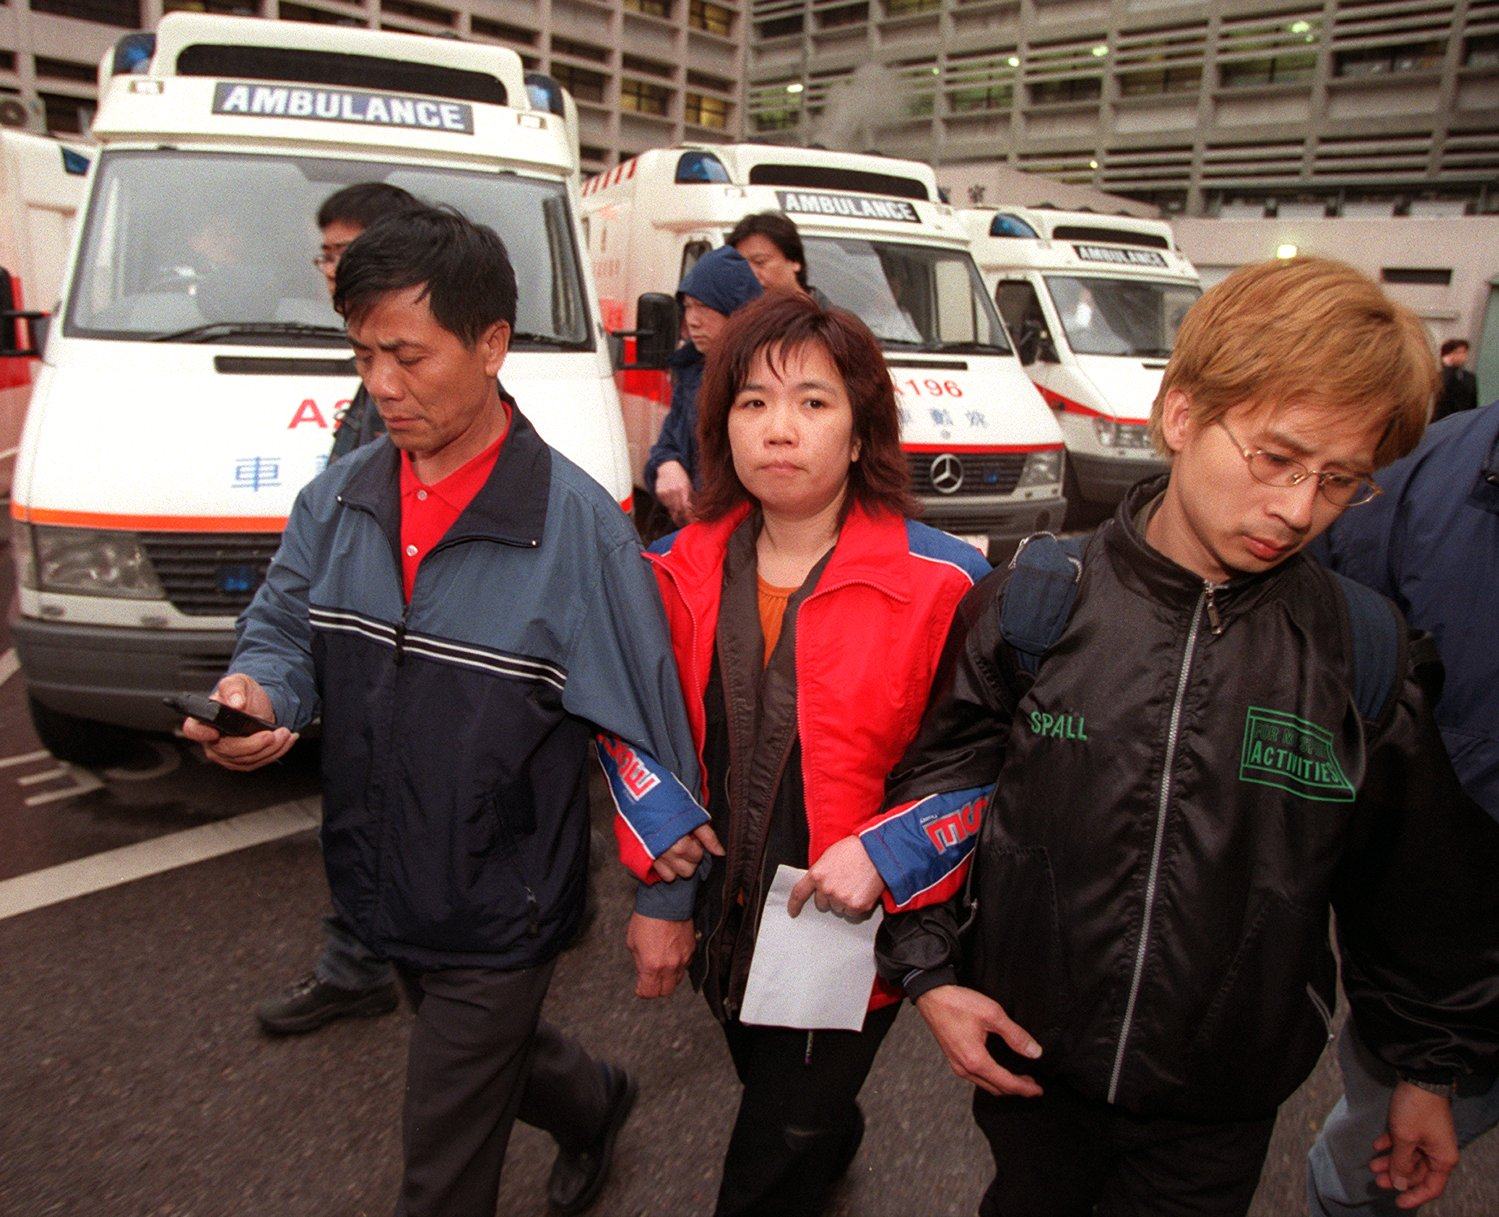 Three tourists from Hong Kong complained abut being wrongfully arrested, beaten and imprisoned in South Africa during a visit in 2000. Photo: SCMP